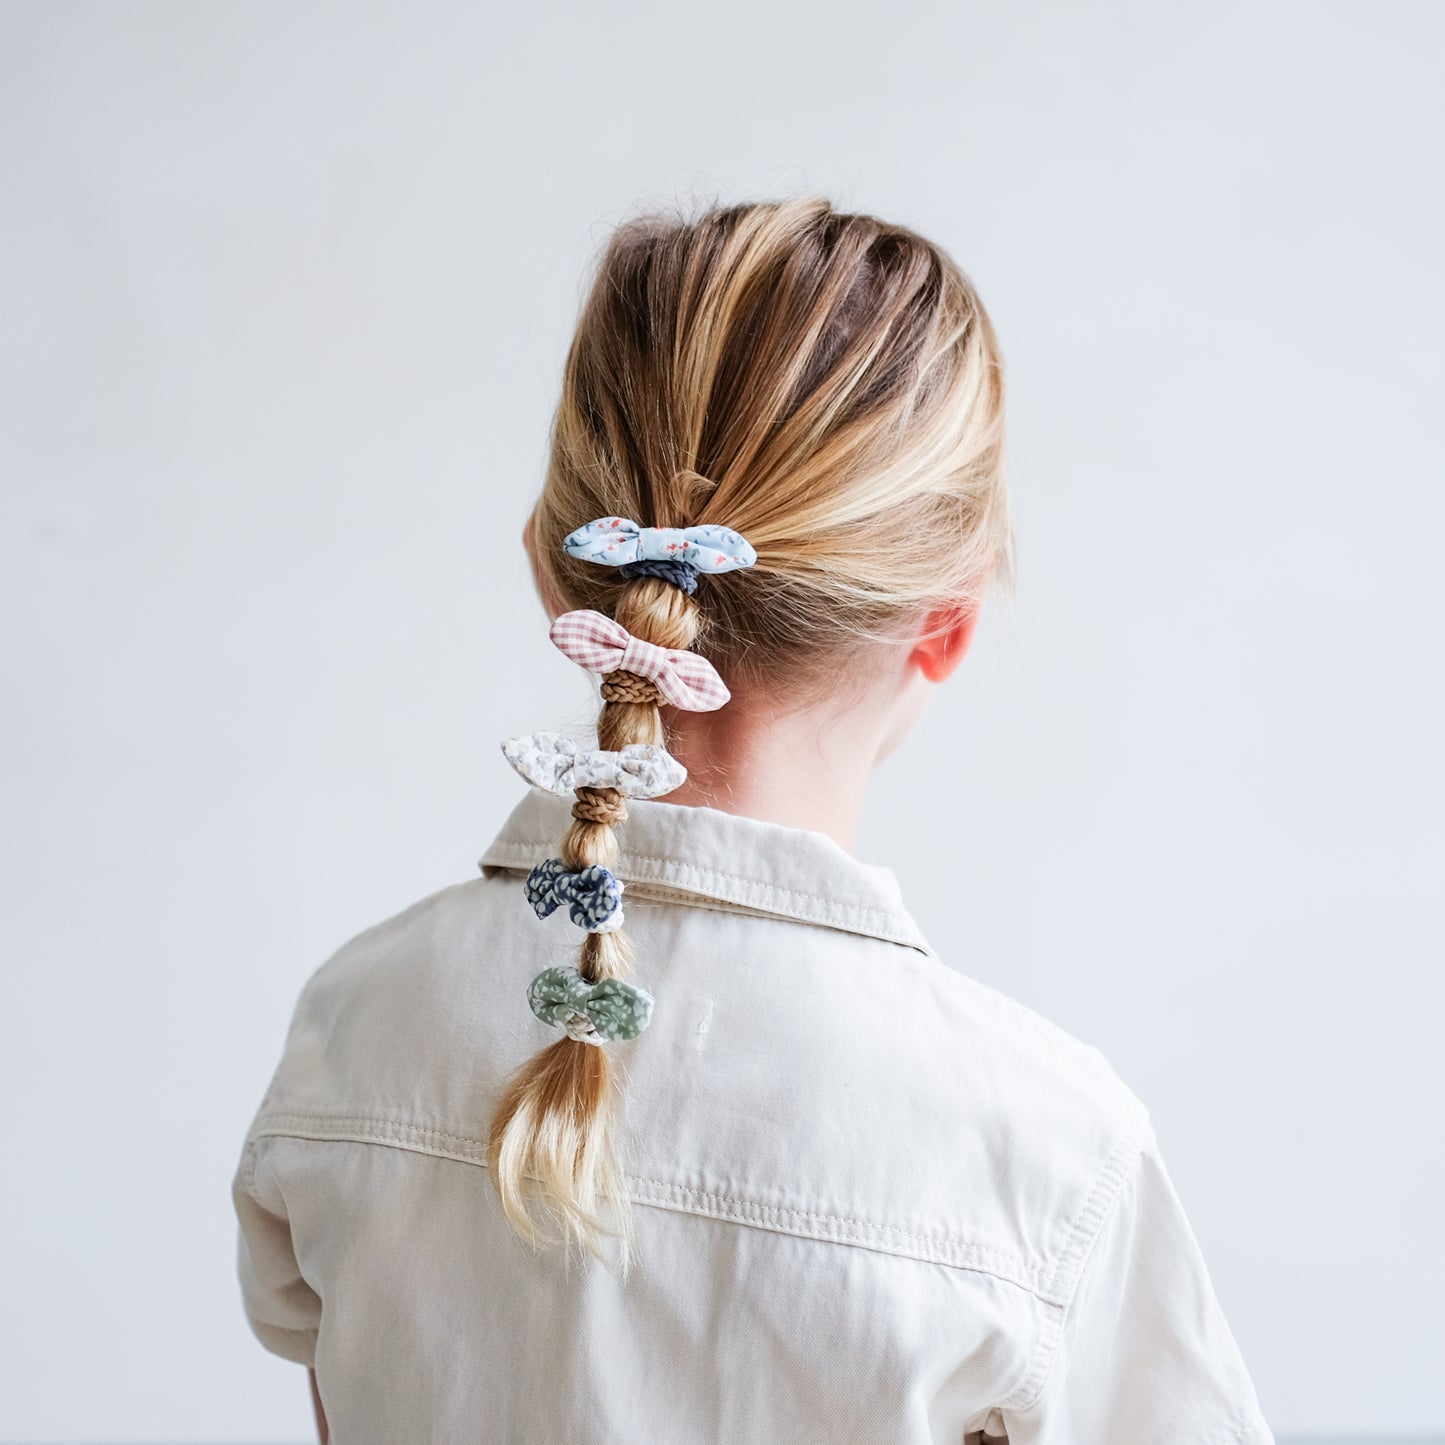 Flora Bow Clips